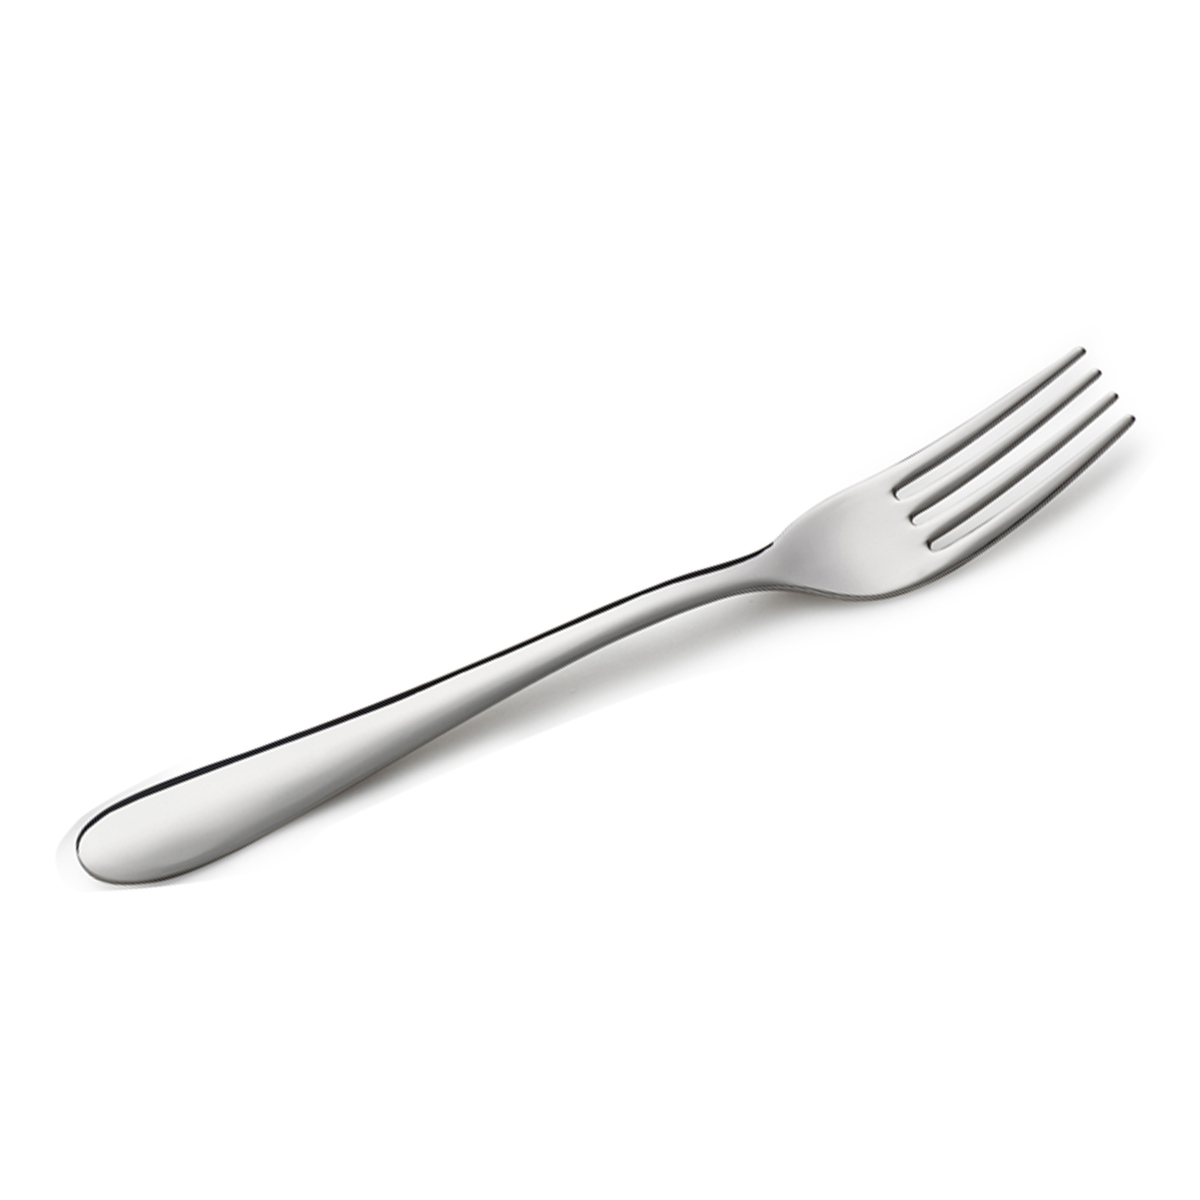 EME Stainless Steel Table Fork, Segno X30, 2 Pcs